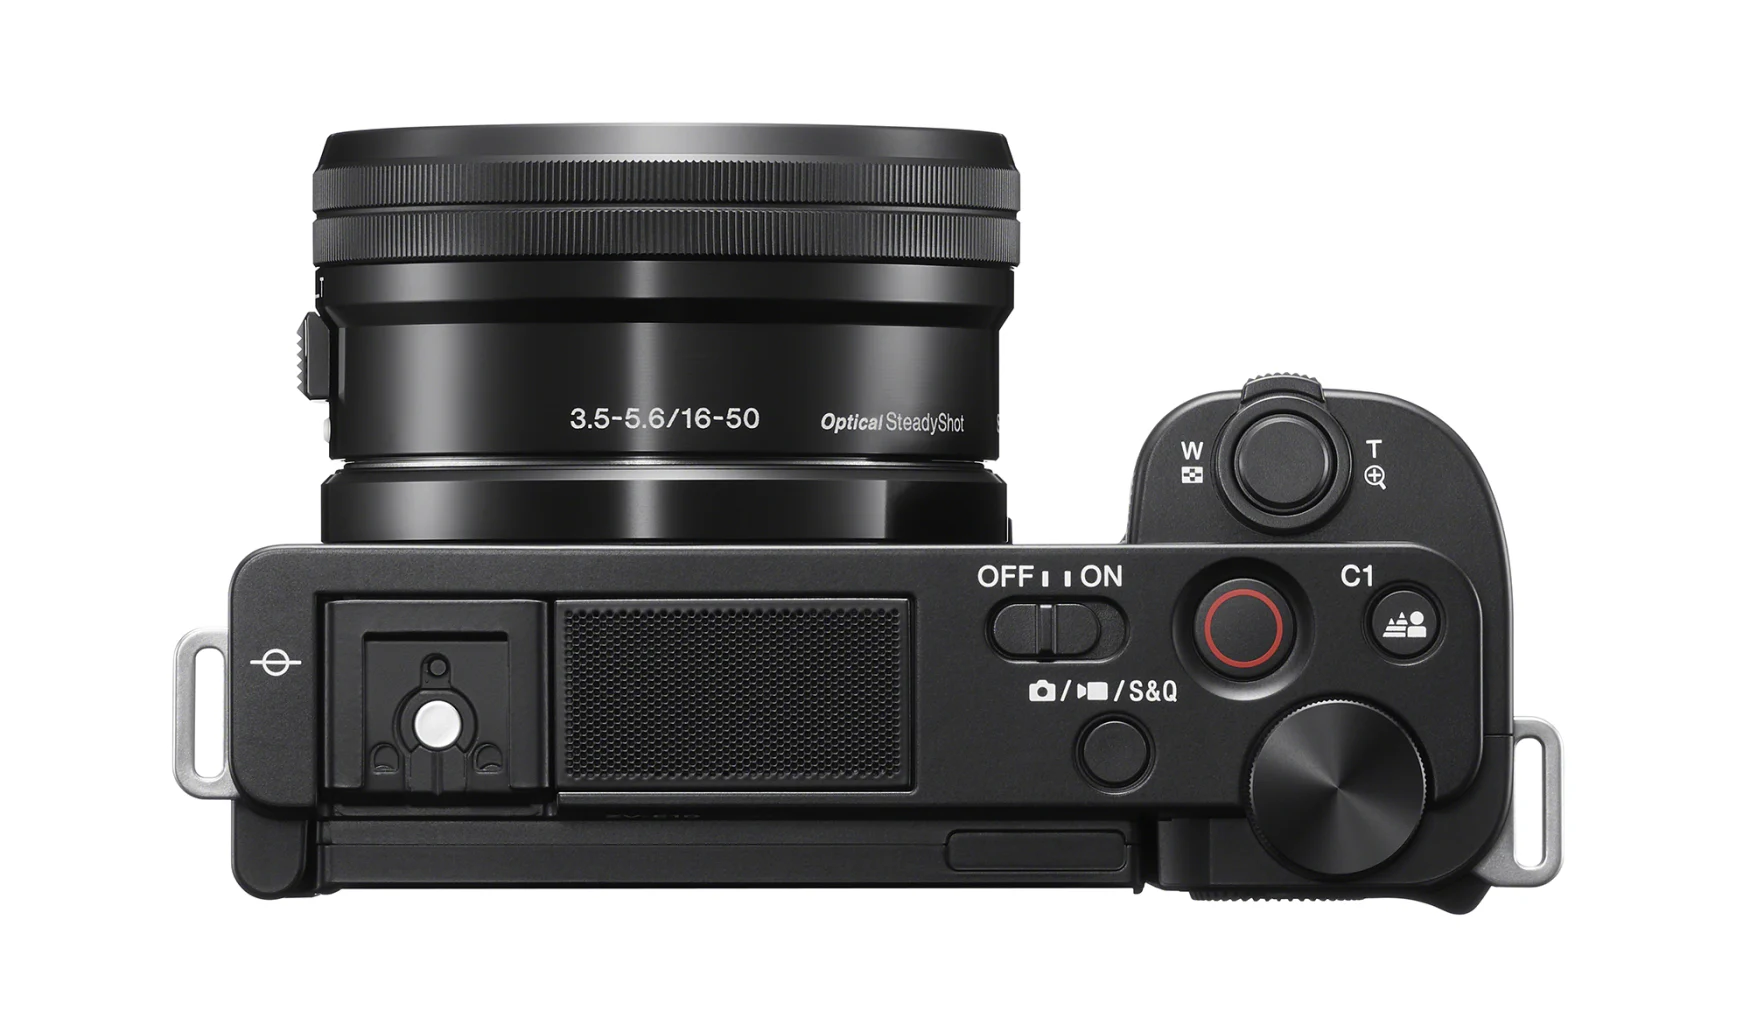 Sony’s ZV-E10 brings interchangeable lenses to its vlogging camera series